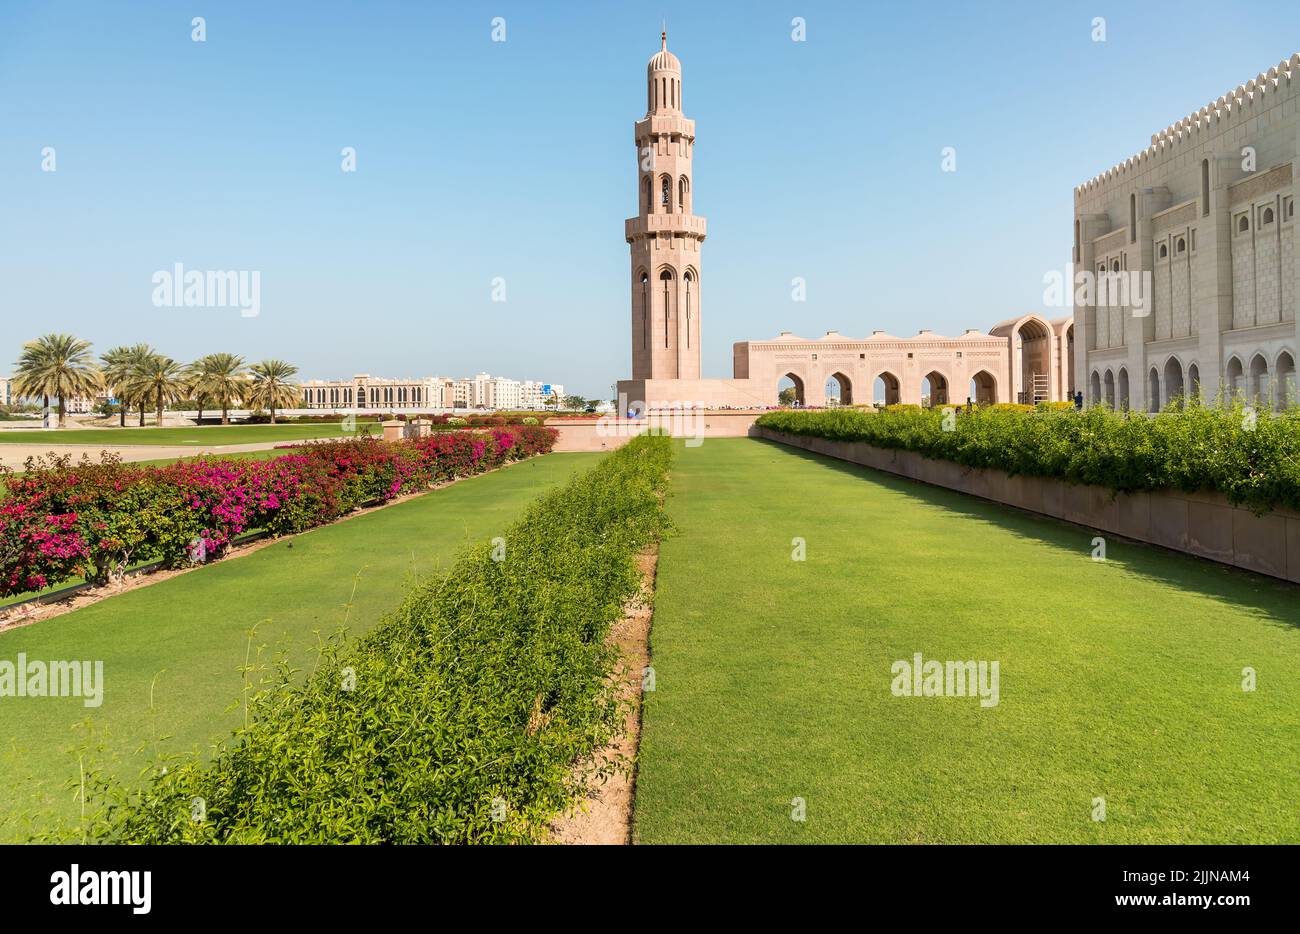 Minaret of the Sultan Qaboos Grand Mosque in Muscat, Oman, Middle East Stock Photo